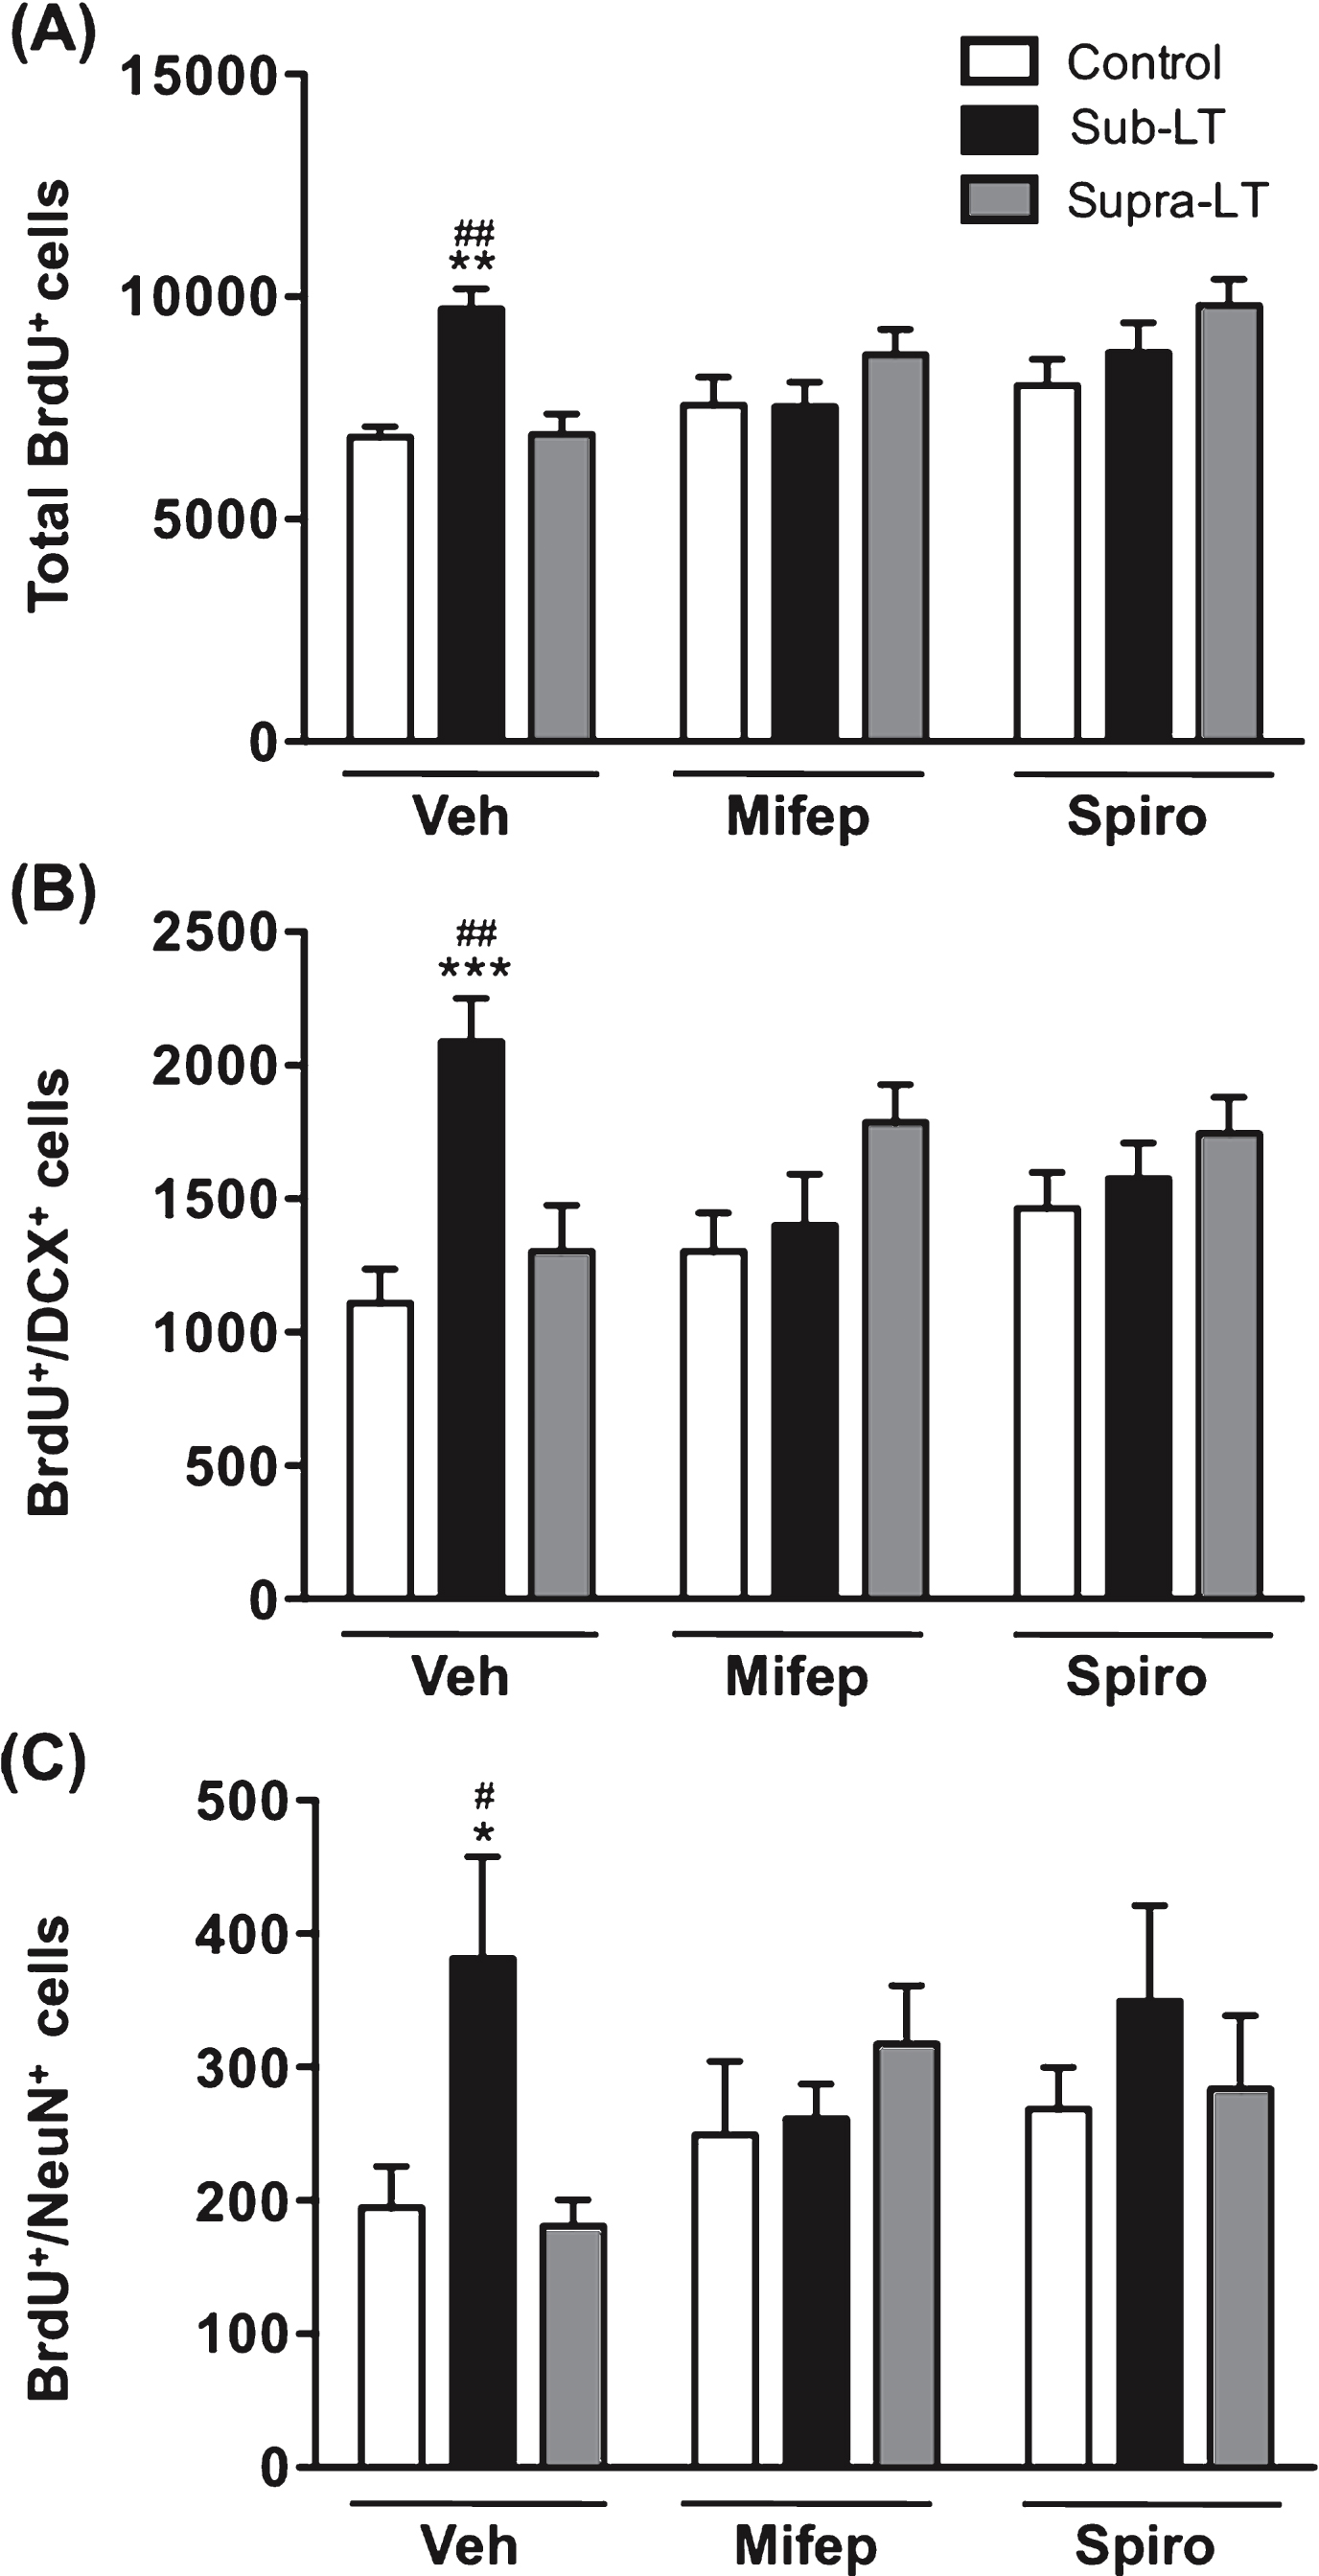 Effects of glucocorticoid receptor antagonists on exercise-induced adult hippocampal neurogenesis The role of glucocorticoid signaling was evaluated with the injection of the mineralocorticoid receptor (MR) antagonist spironolactone, and the glucocorticoid receptor (GR) antagonist mifepristone. (A) Total number of BrdU+ cells. There was a significant main effect of treadmill exercise (F (2,49)  = 4.15, p <  0.05), but not glucocorticoid receptor antagonist (F (2,49)  = 3.07, p = 0.06), and a significant glucocorticoid receptor antagonist×treadmill exercise interaction (F (4,49)  = 4.7, p <  0.01). (B) Number of BrdU+/DCX+ cells. There was a significant main effect of treadmill exercise (F (2,49)  = 5.59, p <  0.01), but not glucocorticoid receptor antagonist (F (2,49)  = 3.72, p = 0.69), and a significant glucocorticoid receptor antagonist×treadmill exercise interaction (F (4,49)  = 4.86, p <  0.01). (C) Number of BrdU+/NeuN+ cells in the dentate gyrus. There was a significant main effect of treadmill exercise (F (2,47)  = 3.23, p <  0.05), but not glucocorticoid receptor antagonist (F (2,47)  = 0.61, p = 0.55), and no significant glucocorticoid receptor antagonist×treadmill exercise interaction (F (4,47)  = 1.87, p = 0.14). Data represent the mean ± SEM (n = 6 -7 mice). *, p <  0.05, **, p <  0.01, ***, p <  0.001 in comparison with respective control mice and #, p <  0.05, ##, p <  0.01 in comparison with supra-LT (two-way ANOVA and Bonferroni post hoc tests).